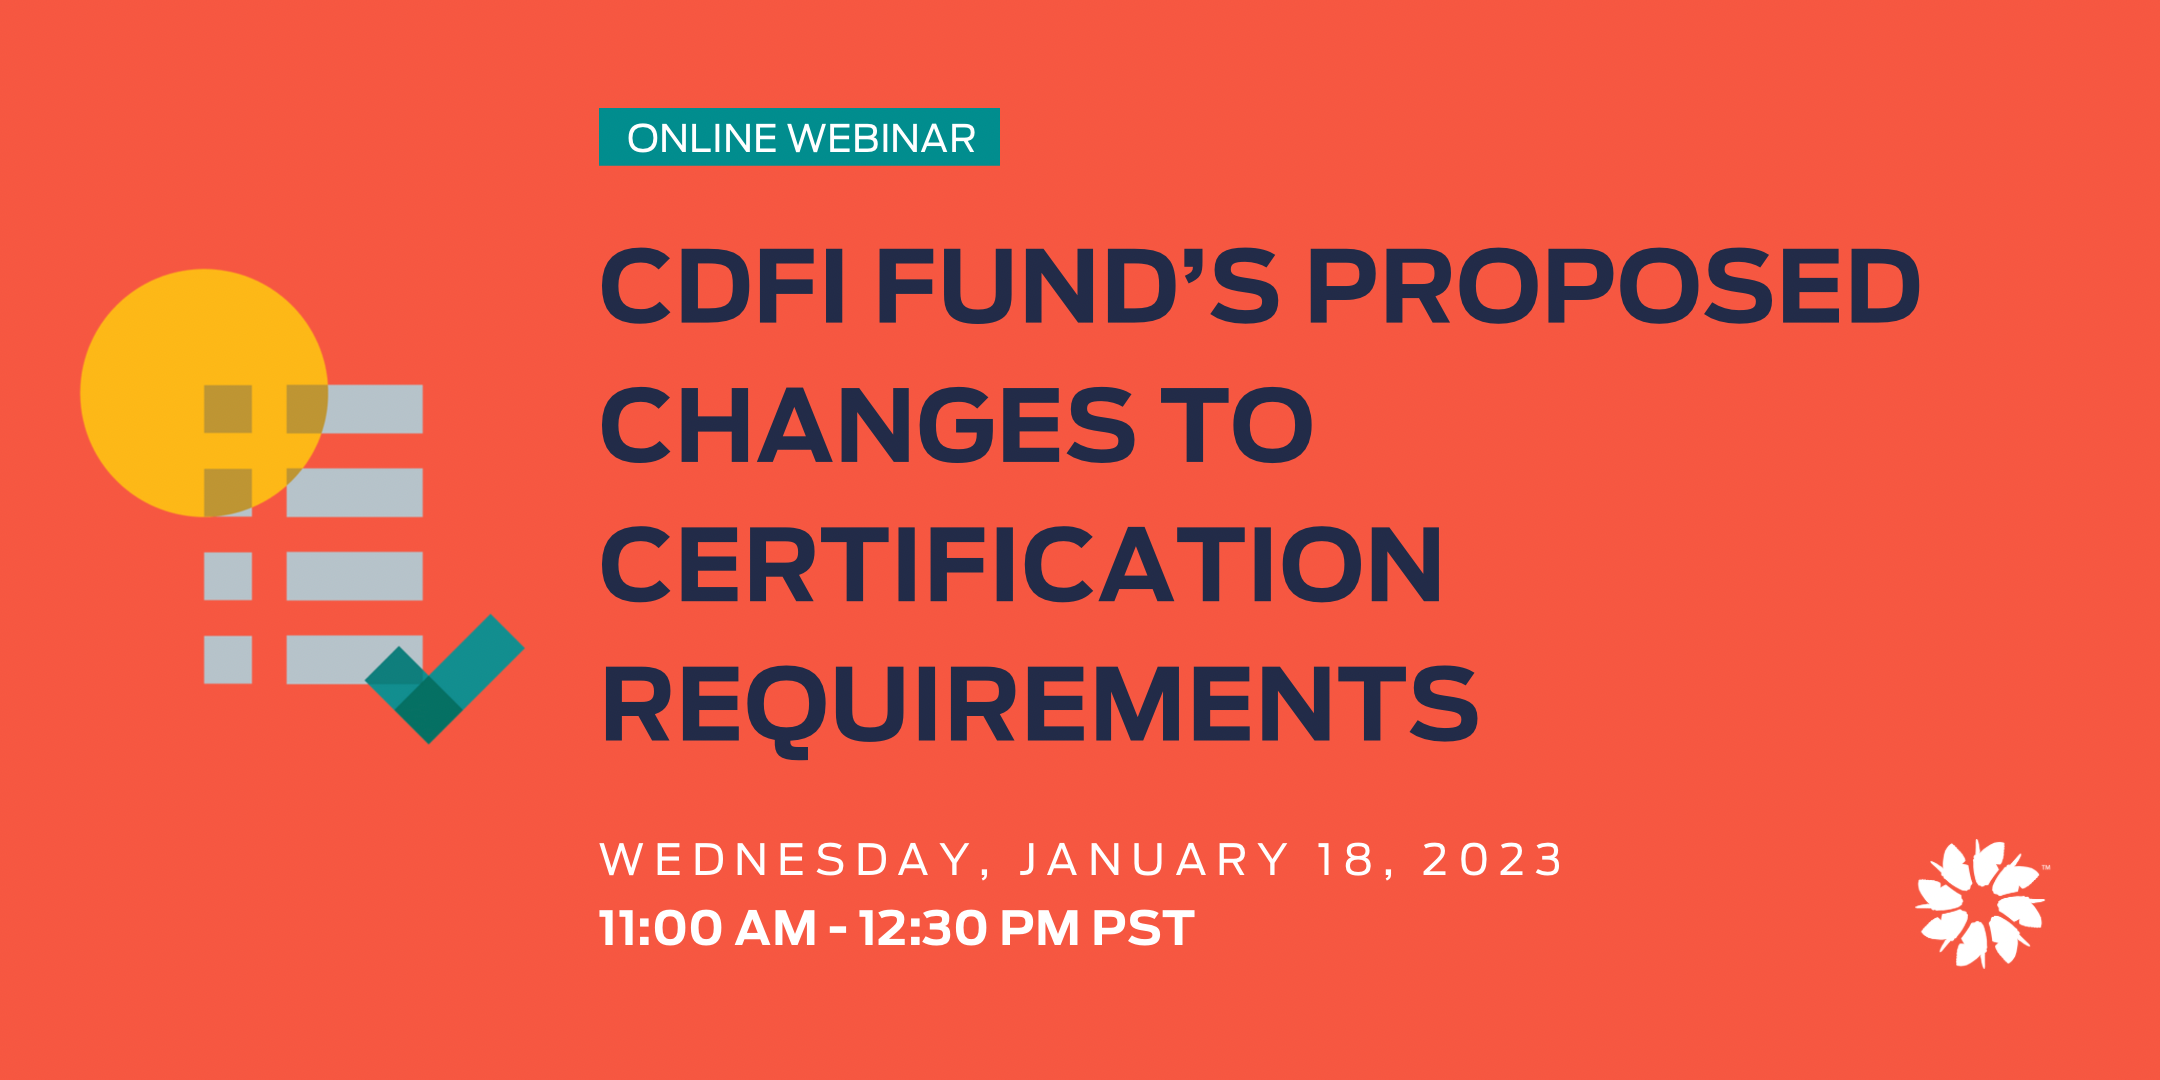 Webinar: CDFI Fund’s Proposed Changes to Certification Requirements